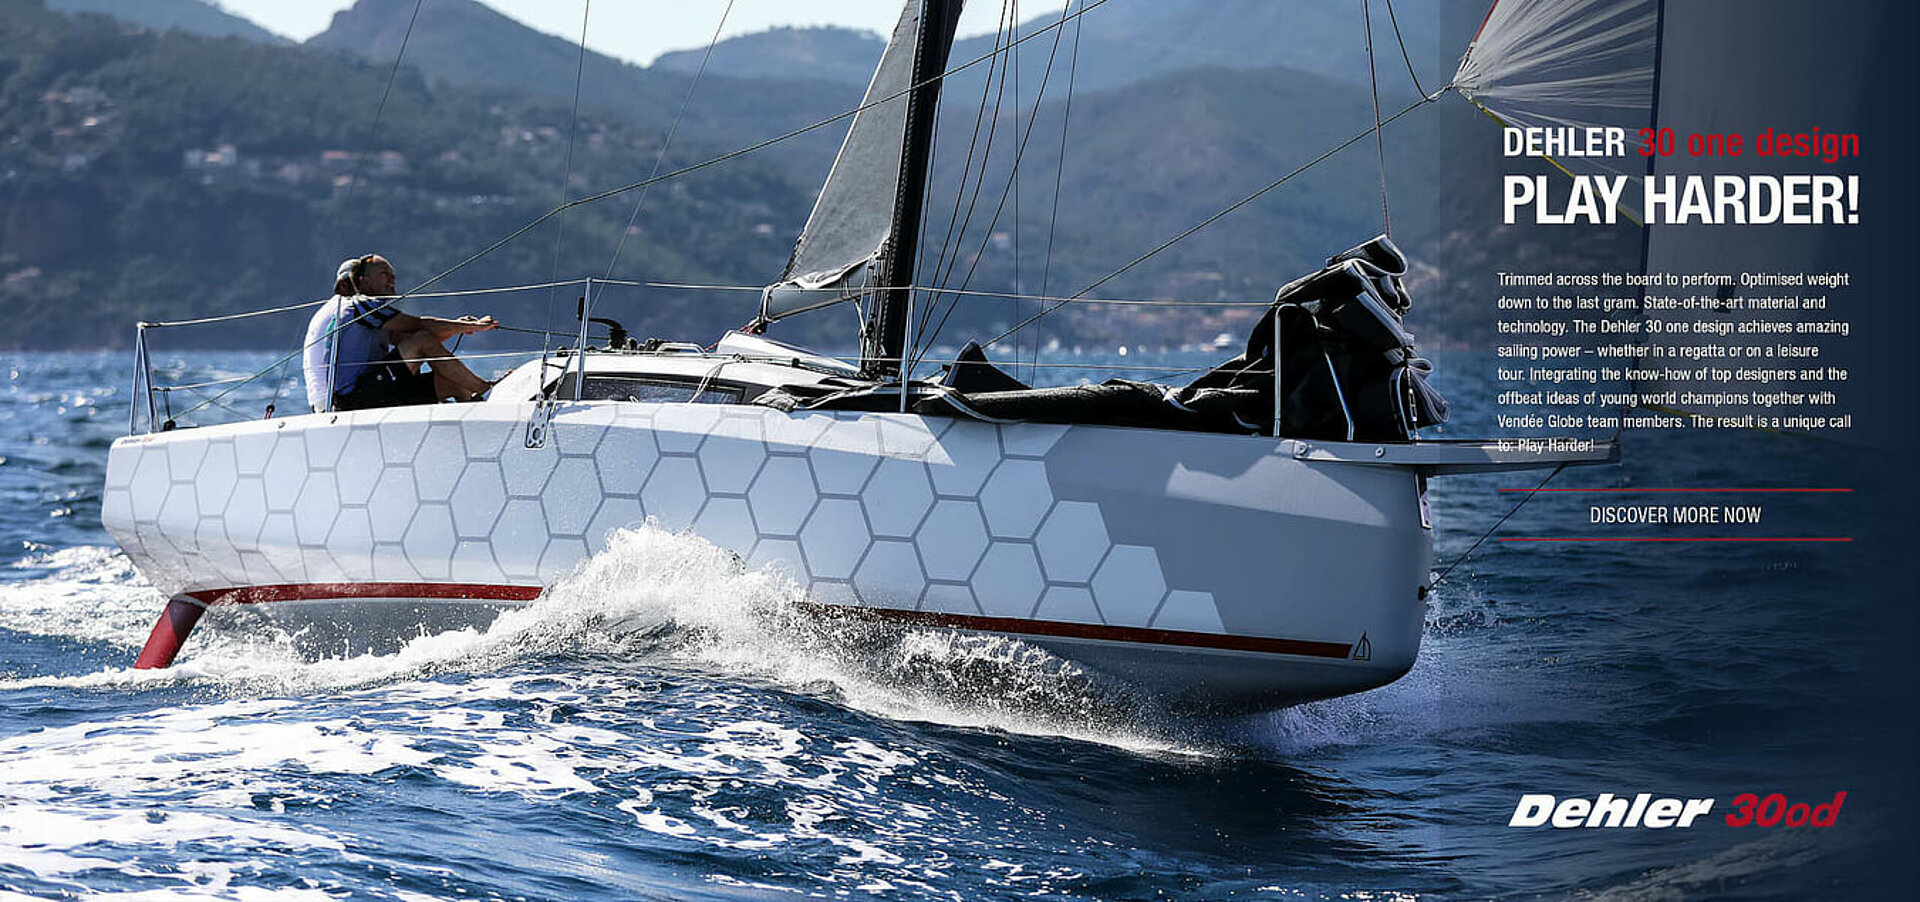 Dehler 30 one design high performance sailboat made for sail racing with a high degree of customization